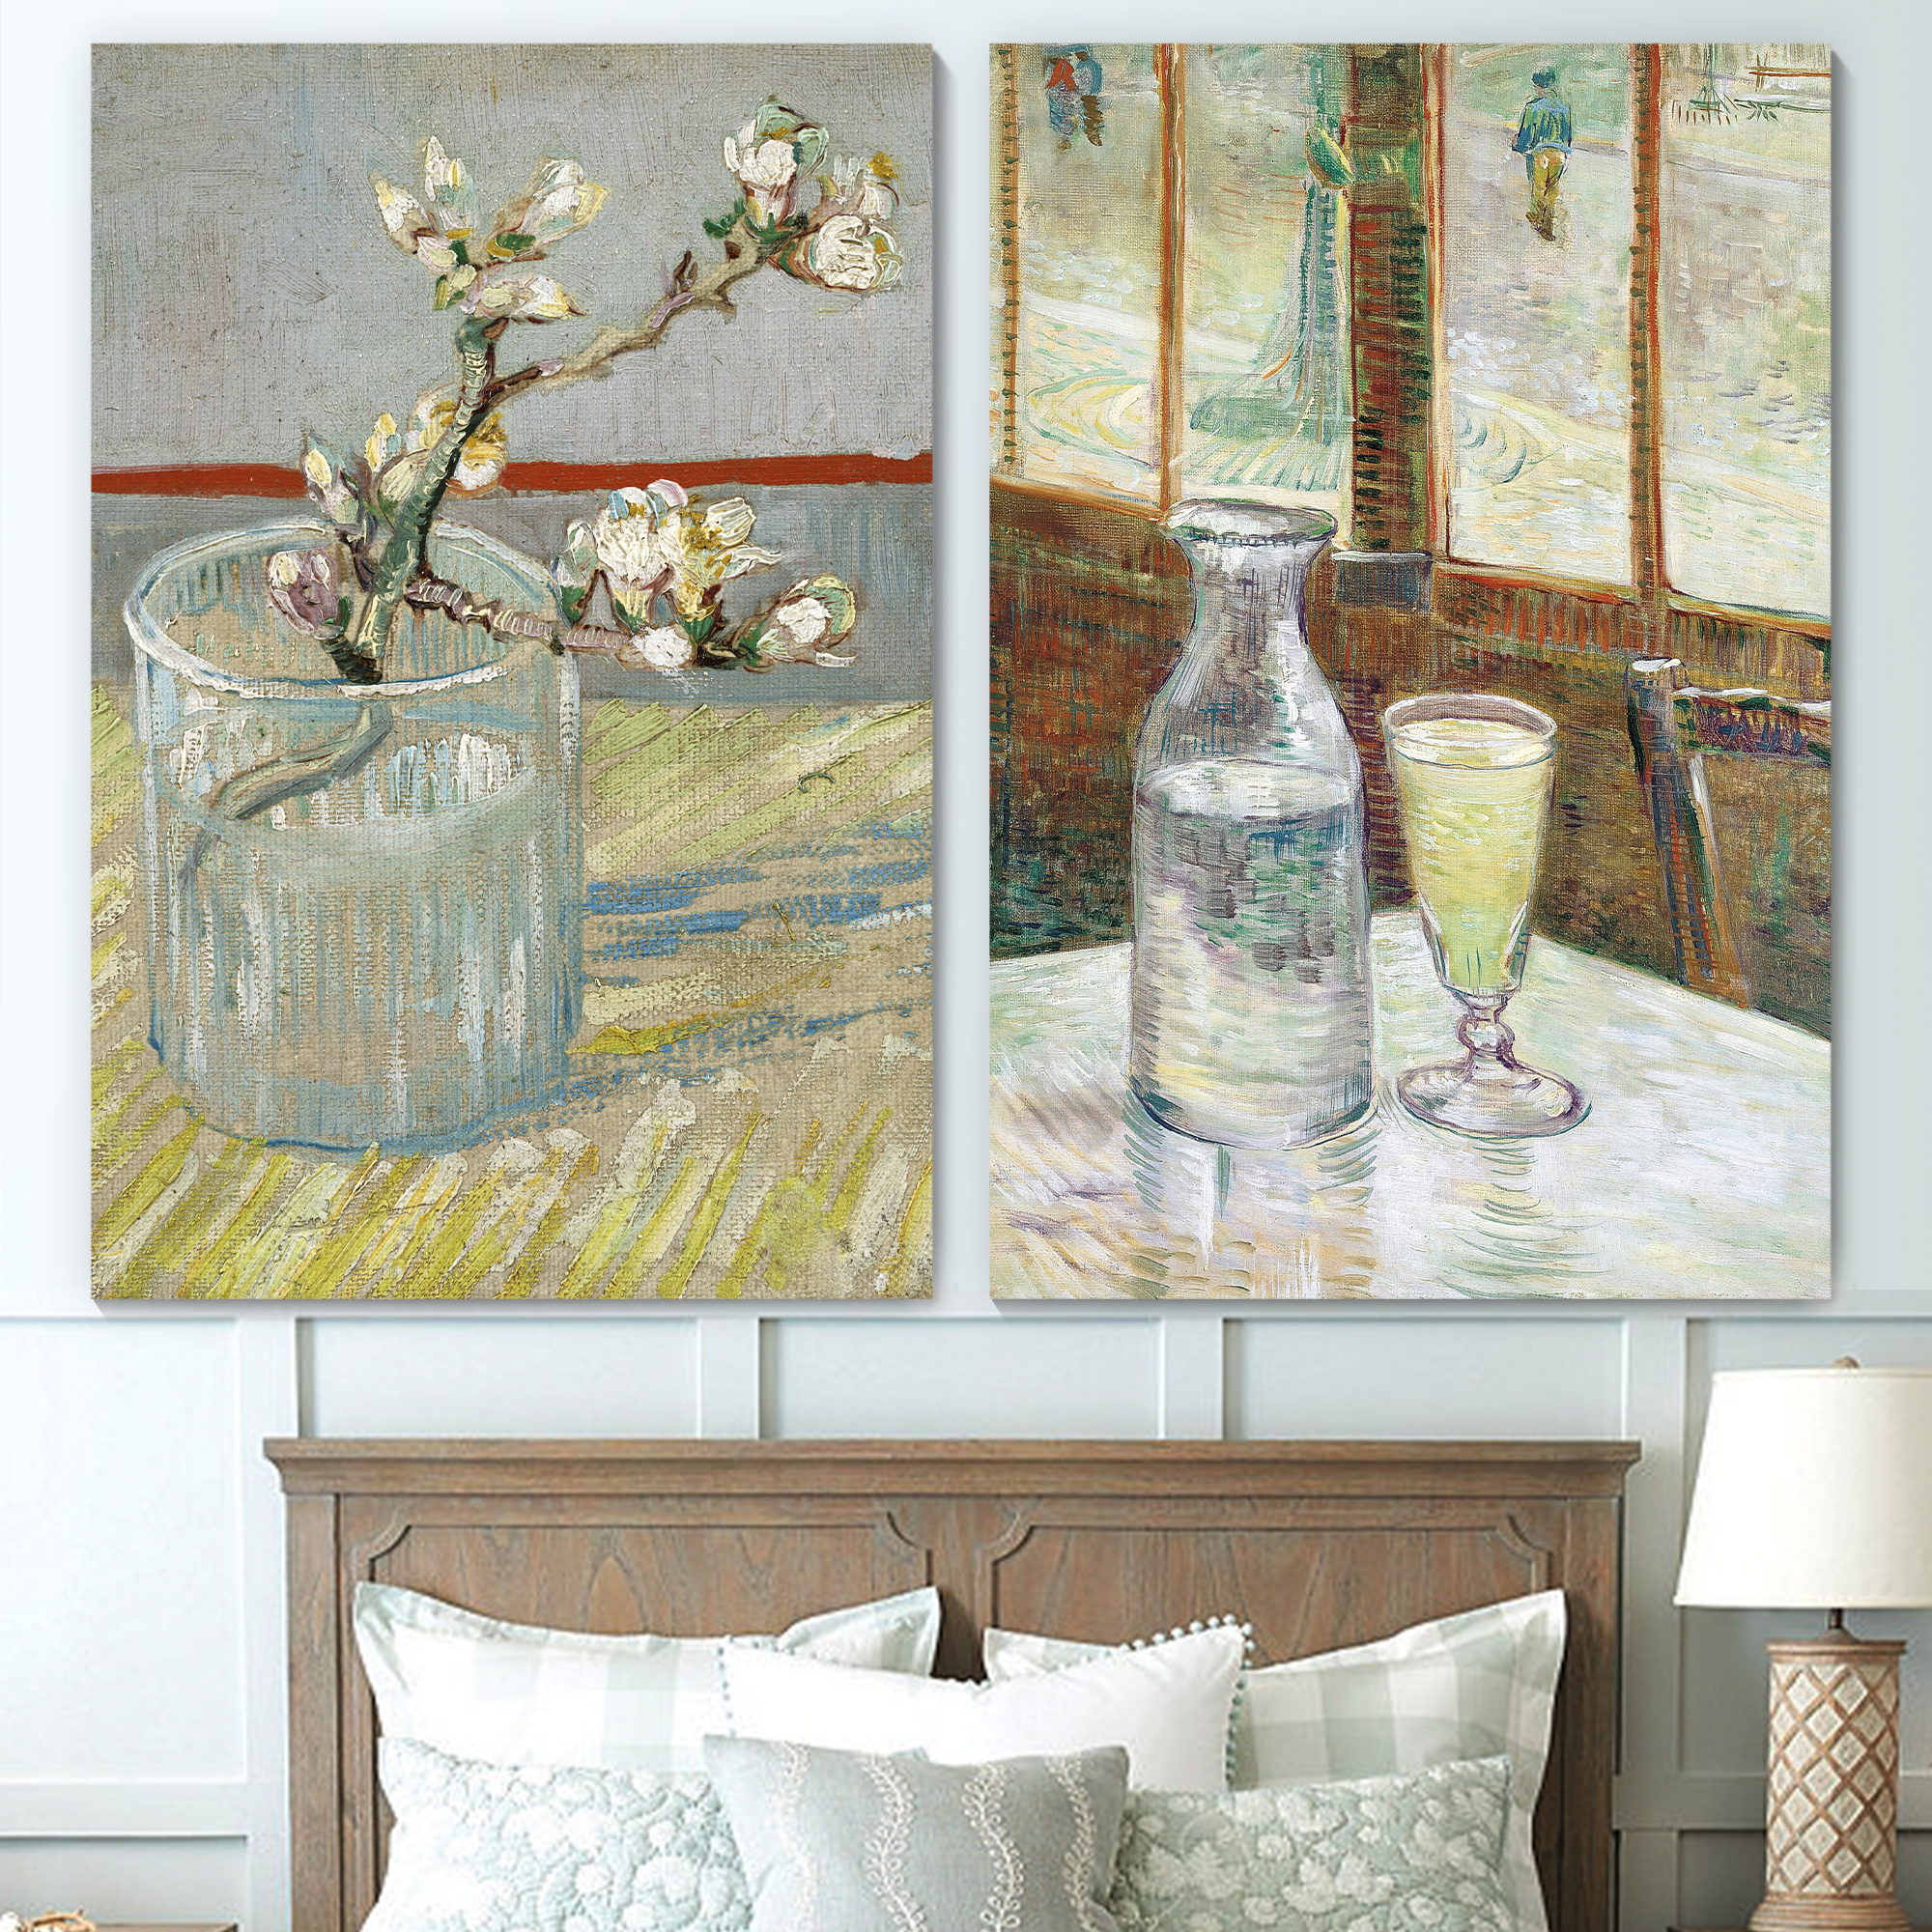 Wall26 - Sprig of Flowering Almond in a Glass/Cafe Table With Absinthe by Vincent Van Gogh - Oil Painting Reproduction in Set of 2 | Canvas Prints Wall Art, Ready to Hang - 16